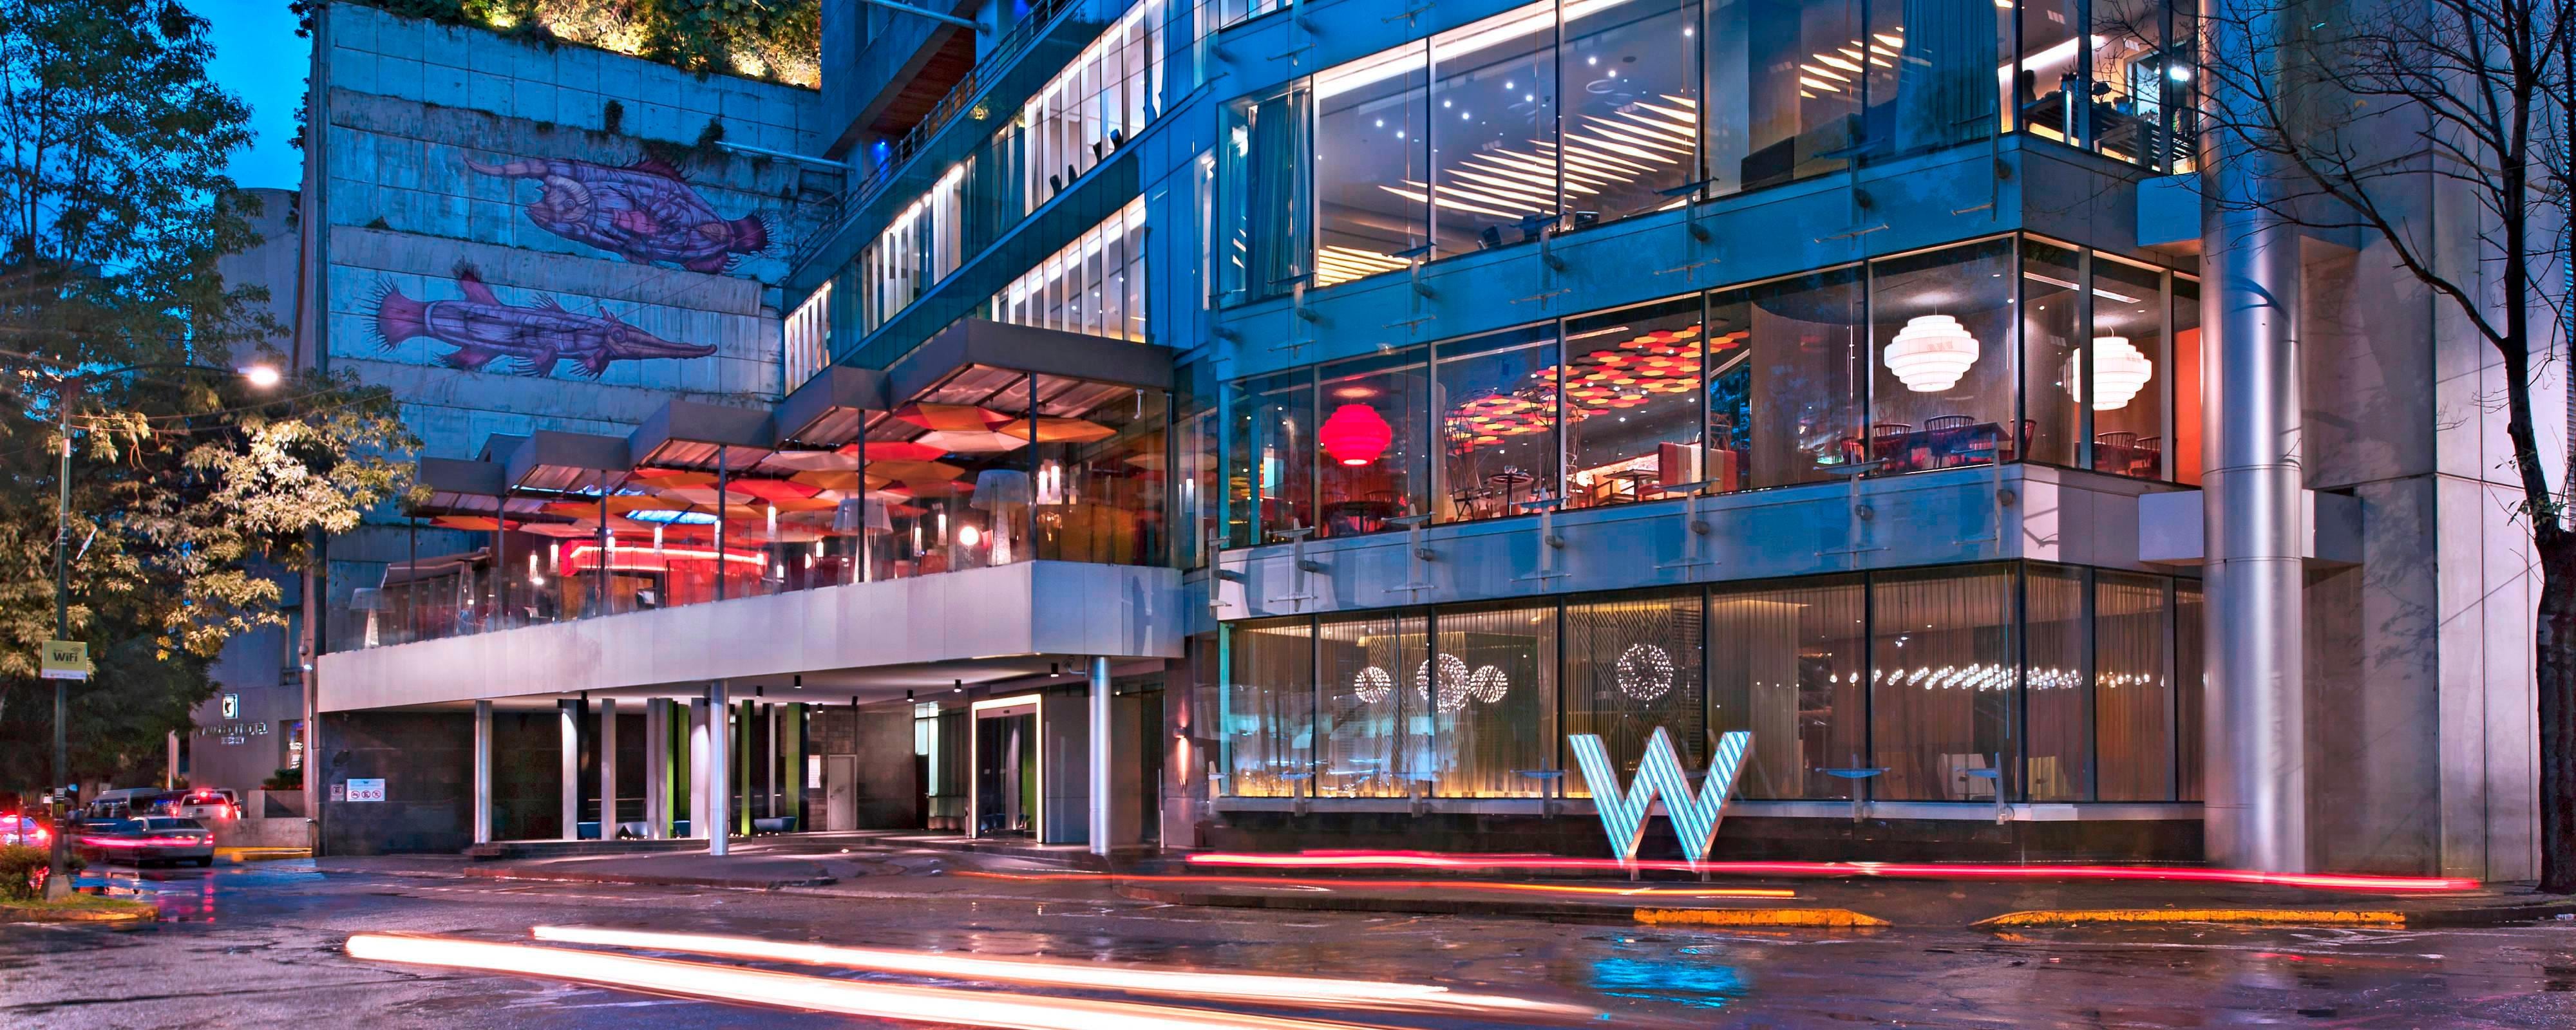 Image for W Mexico City, a Marriott hotel.